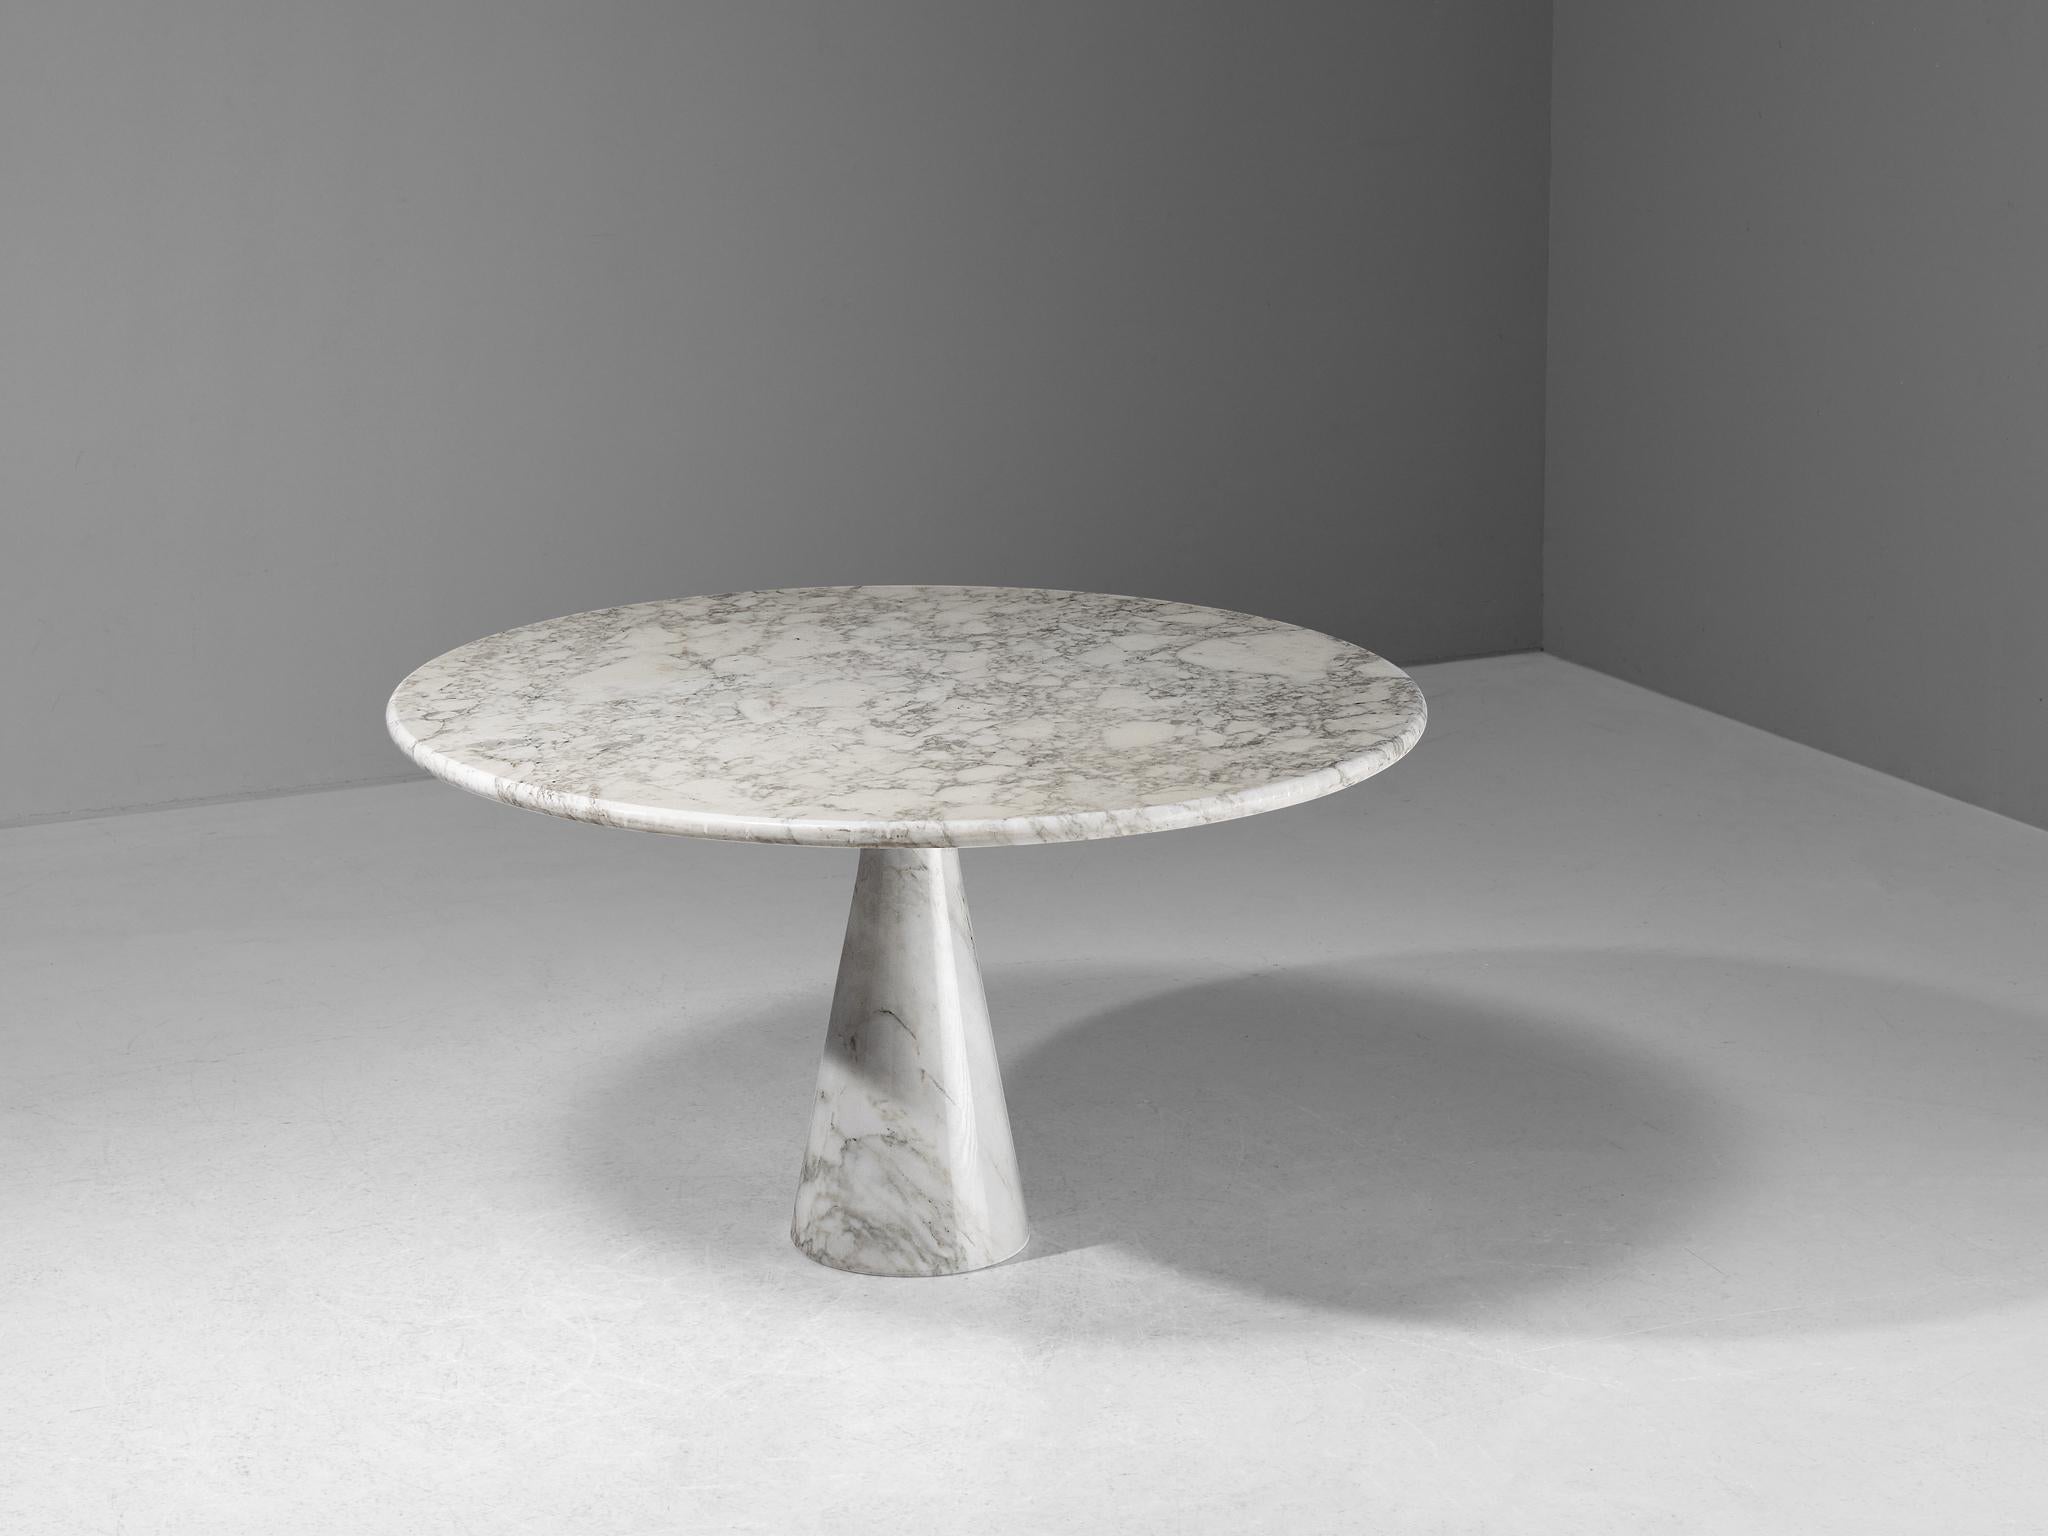 Angelo Mangiarotti for Skipper, dining table ‘M1’, Calacatta marble, 1969

This sculptural table by Angelo Mangiarotti is a skilful example of postmodern design. The strikingly patterned white to grey table has a cone-shaped pedestal and a circular